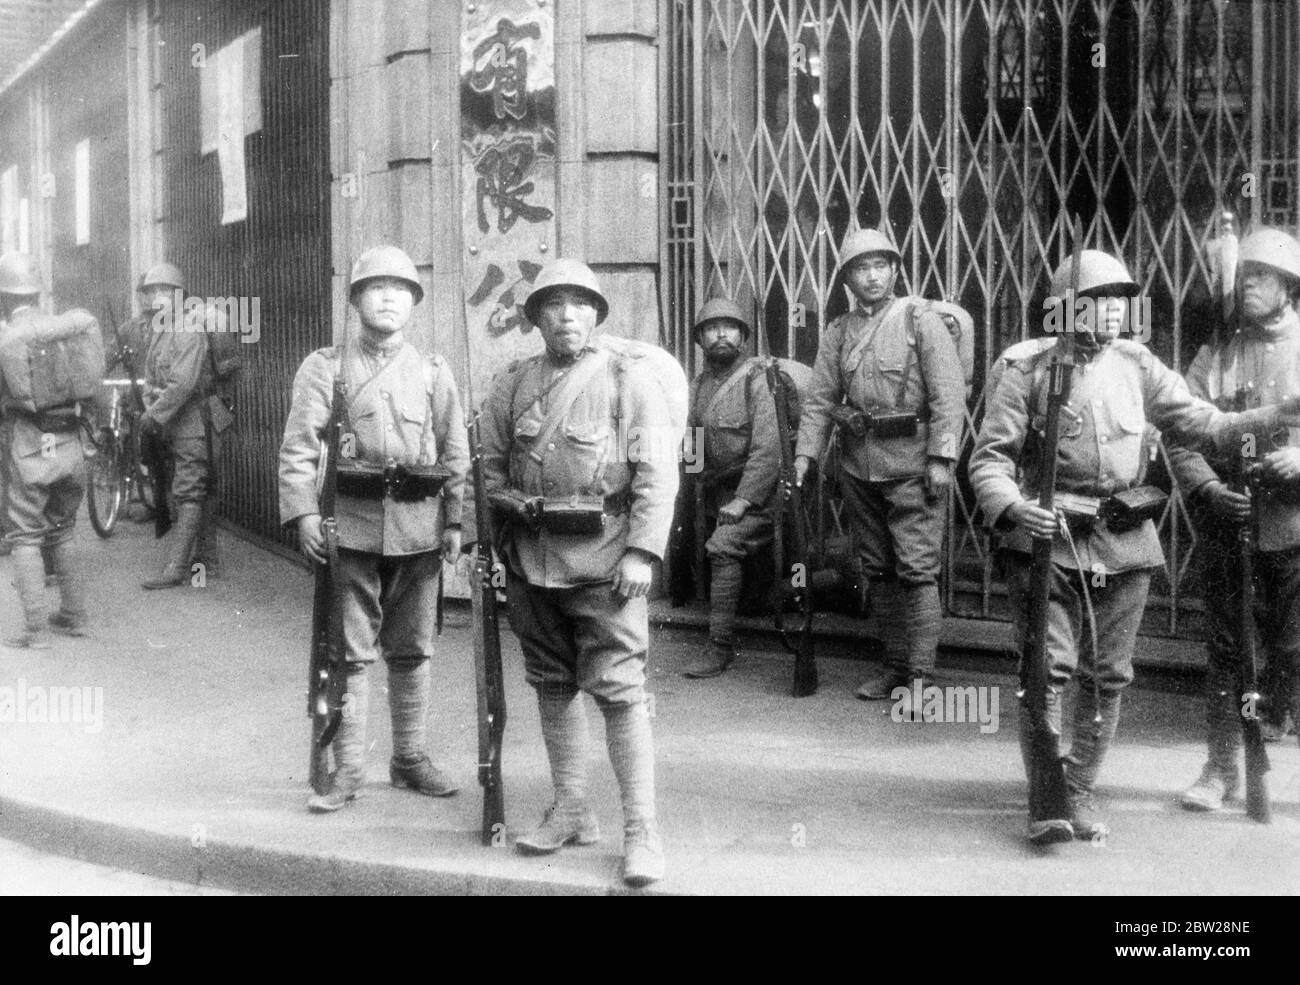 Chinese who threw hand grenade at Japanese 'Victory March' shot by Chinese policeman in International Settlement. Exclusive pictures of the incident. These exclusive pictures, just received in London, were taken when a Chinese threw a hand grenade in the mist of 5000 Japanese soldiers who were taking part in a victory march through the International Settlement at Shanghai. Several of the Japanese were injured and the Chinese who was responsible for the explosion was shot dead by a Chinese policeman of the settlement. The incident was followed by great confusion, the Japanese troops scattering Stock Photo